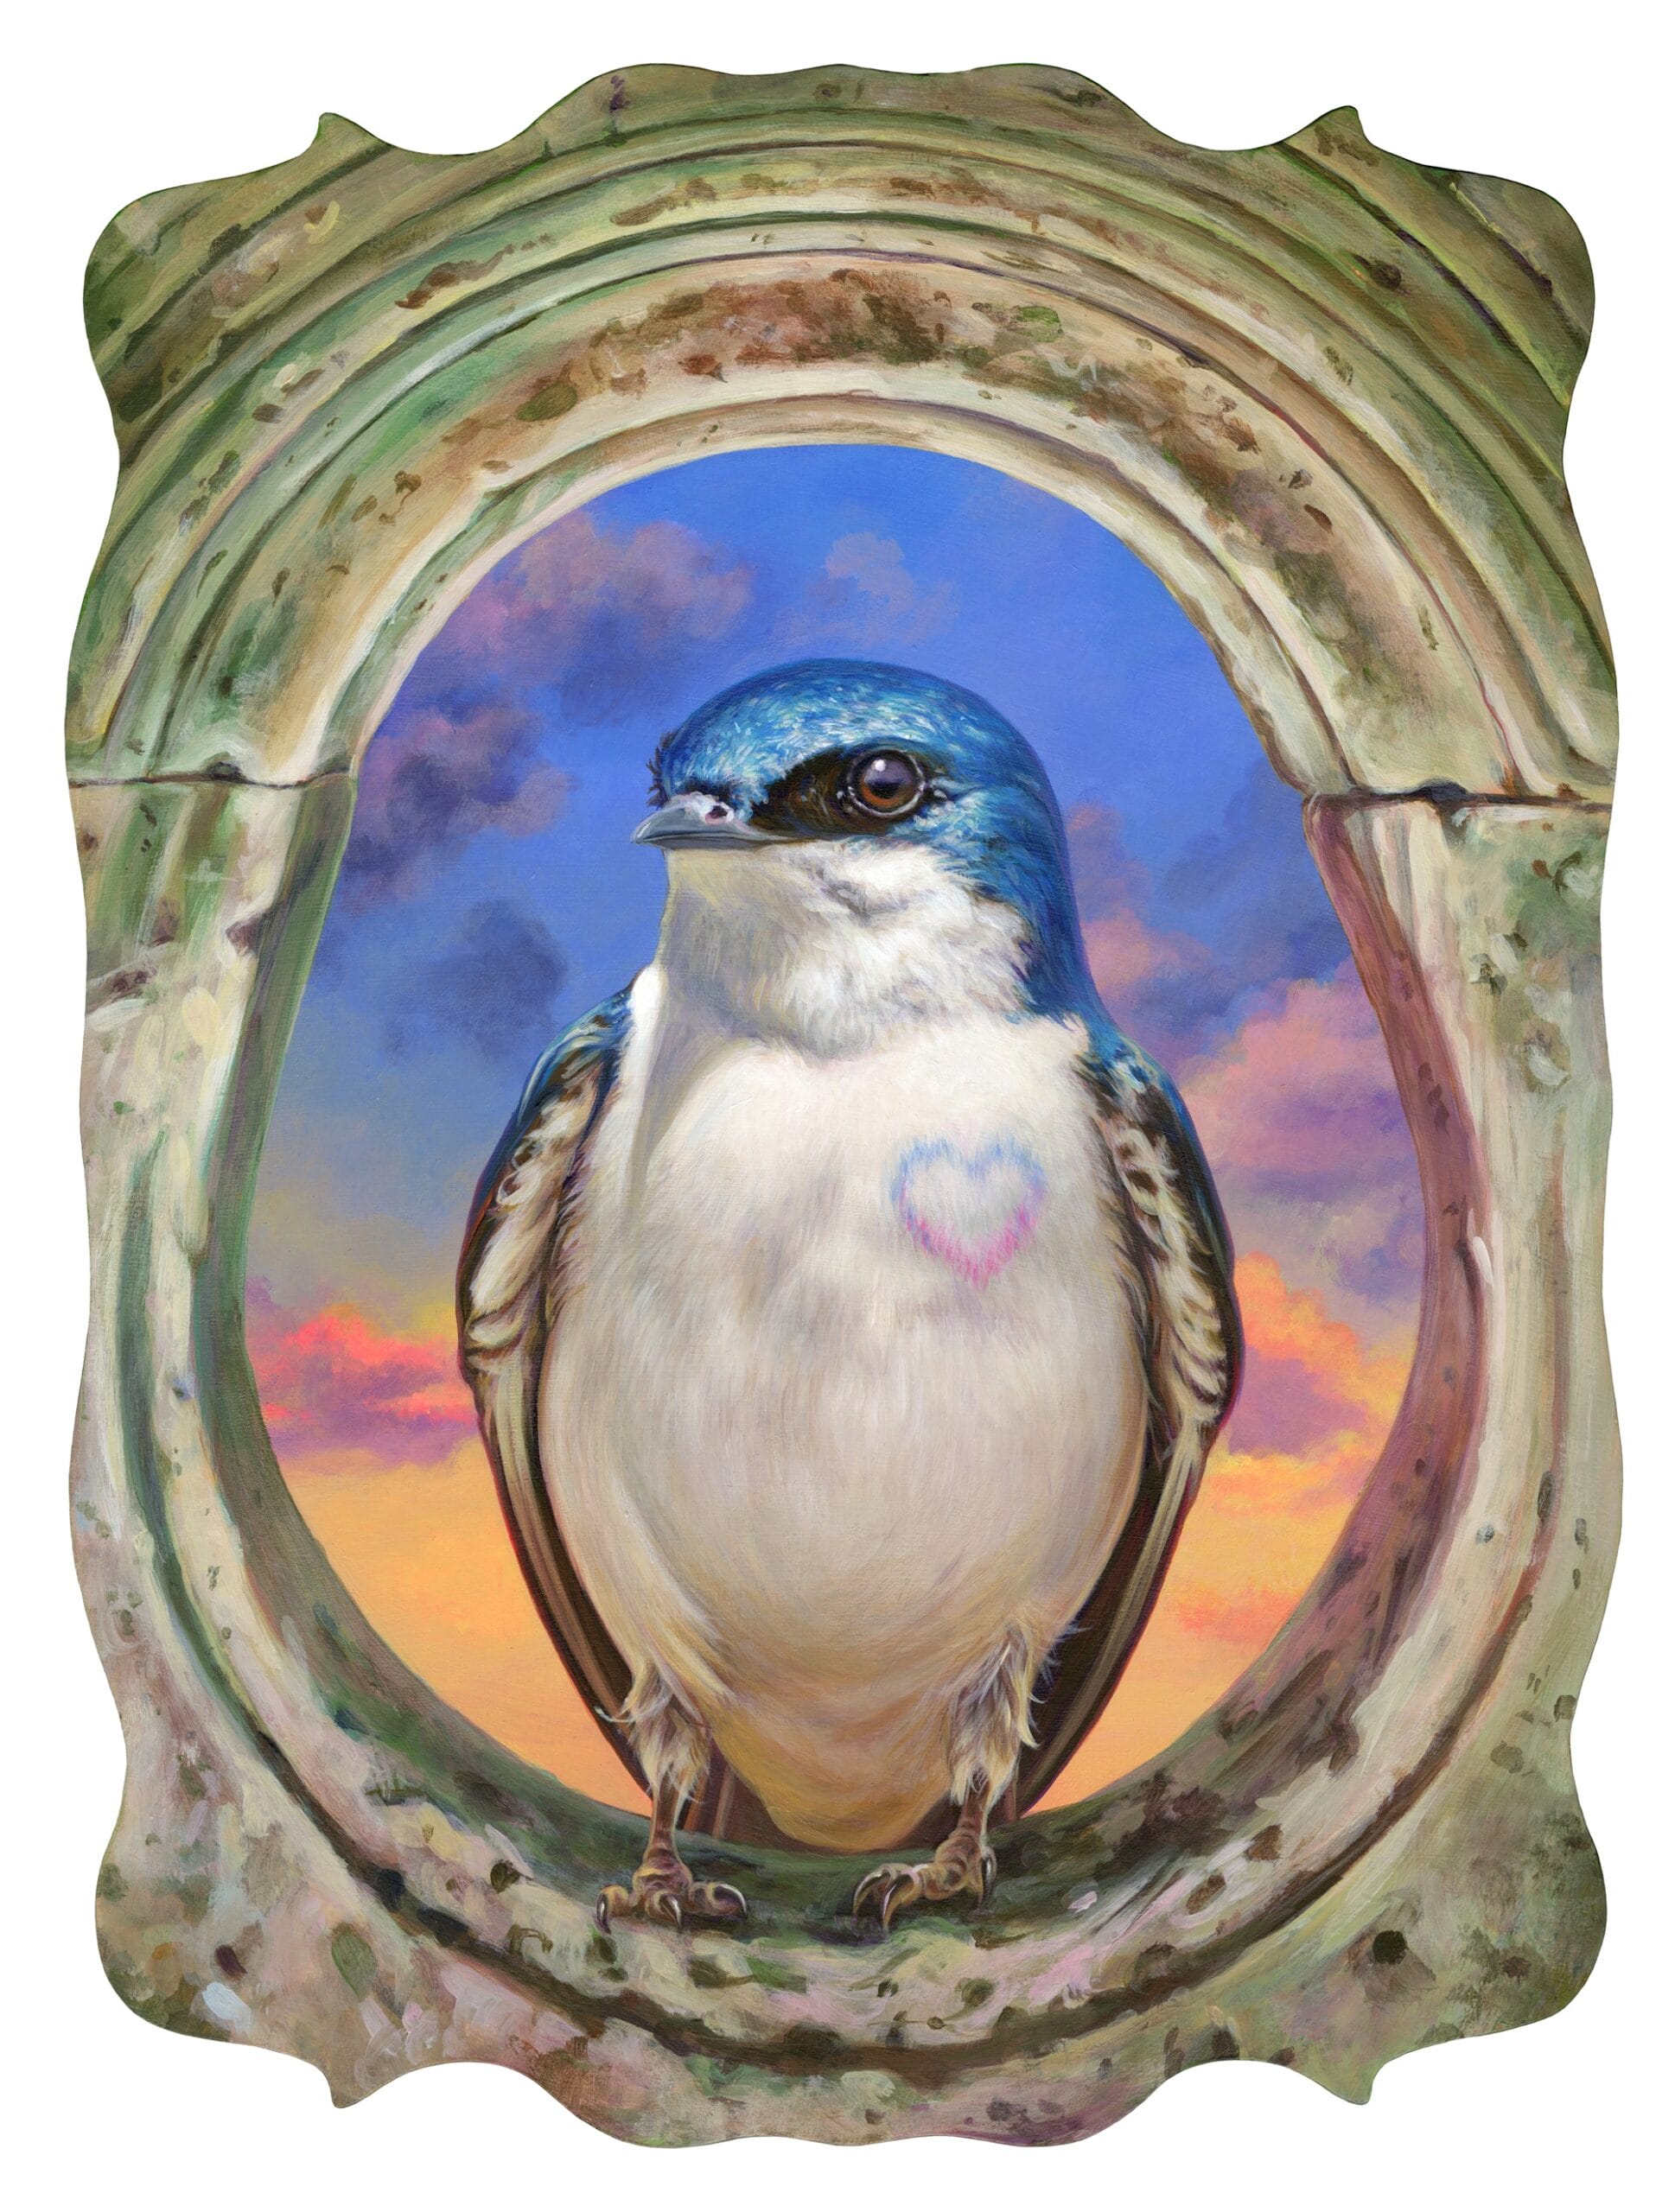 an acrylic painting on a wood panel of a bluebird with a heart on its breast, perched in a painted frame, which has been cut and shaped around the edges